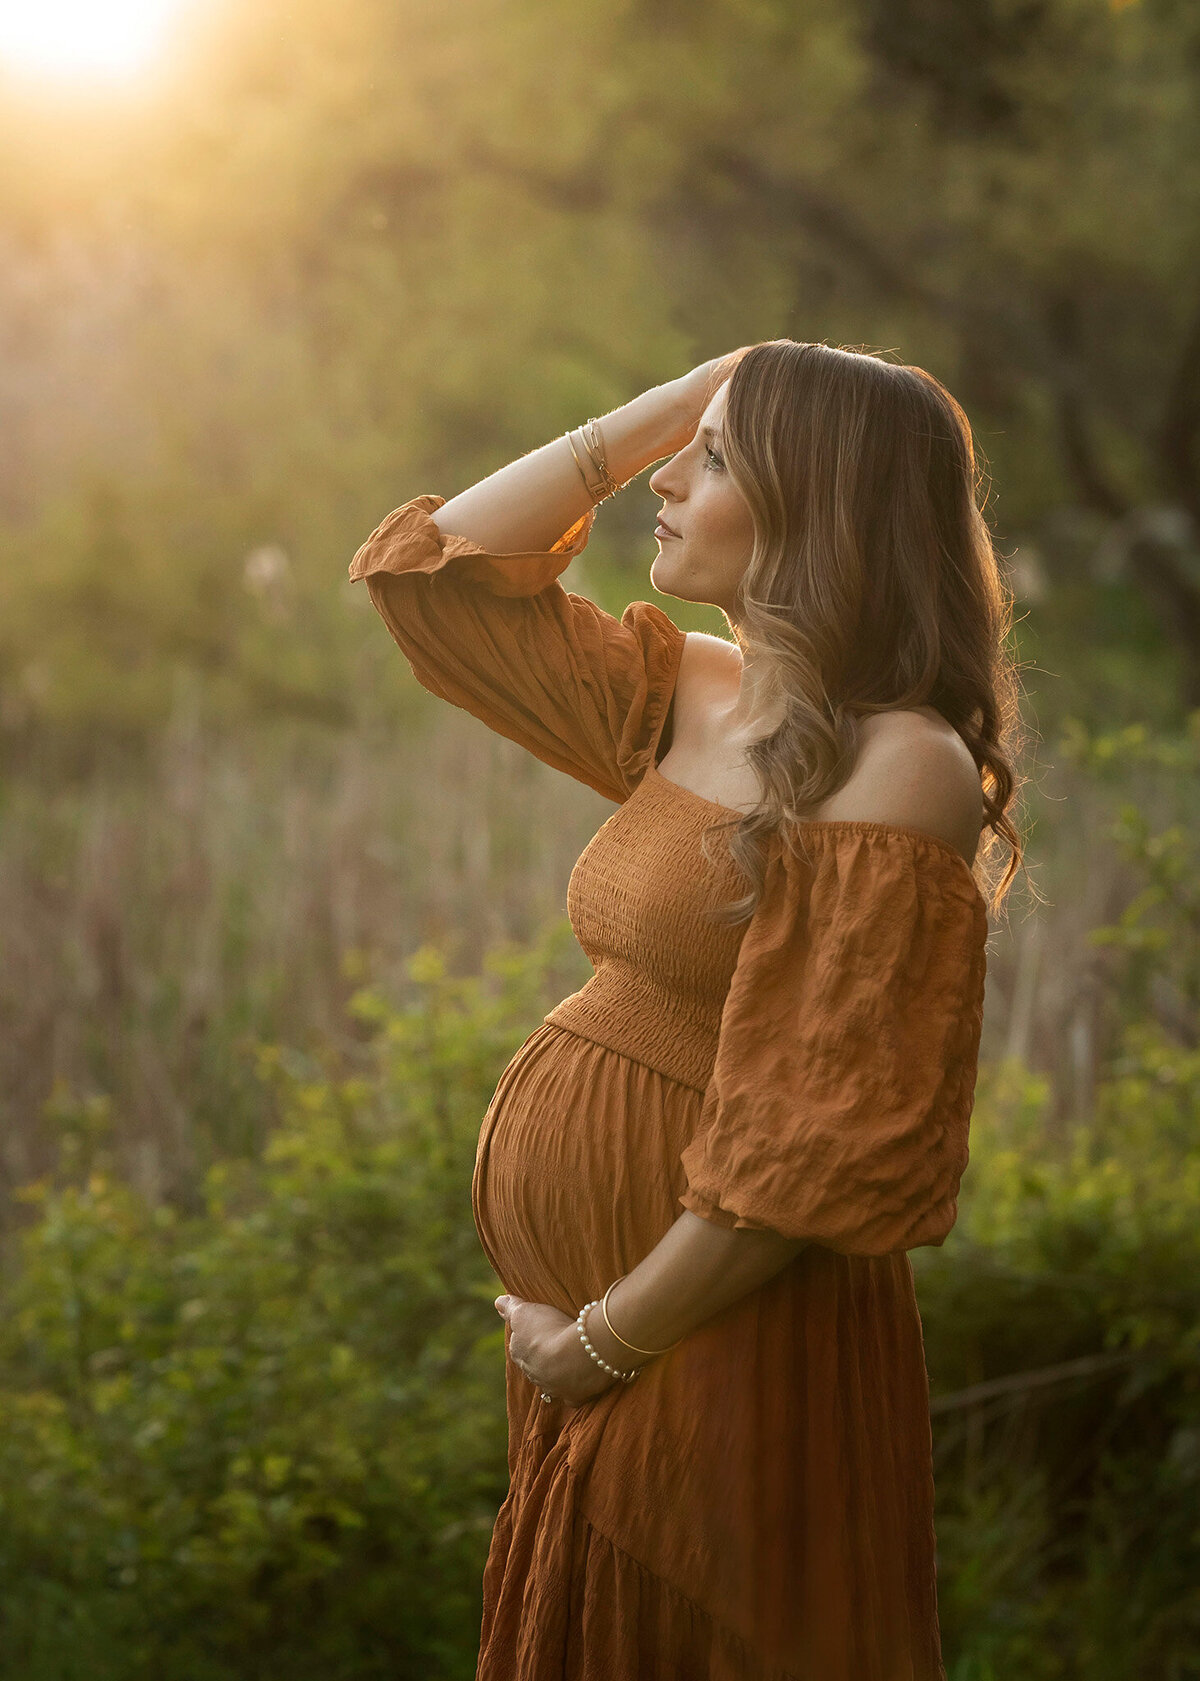 NJ Maternity Photographer captures mom holding her body while in a golden glow